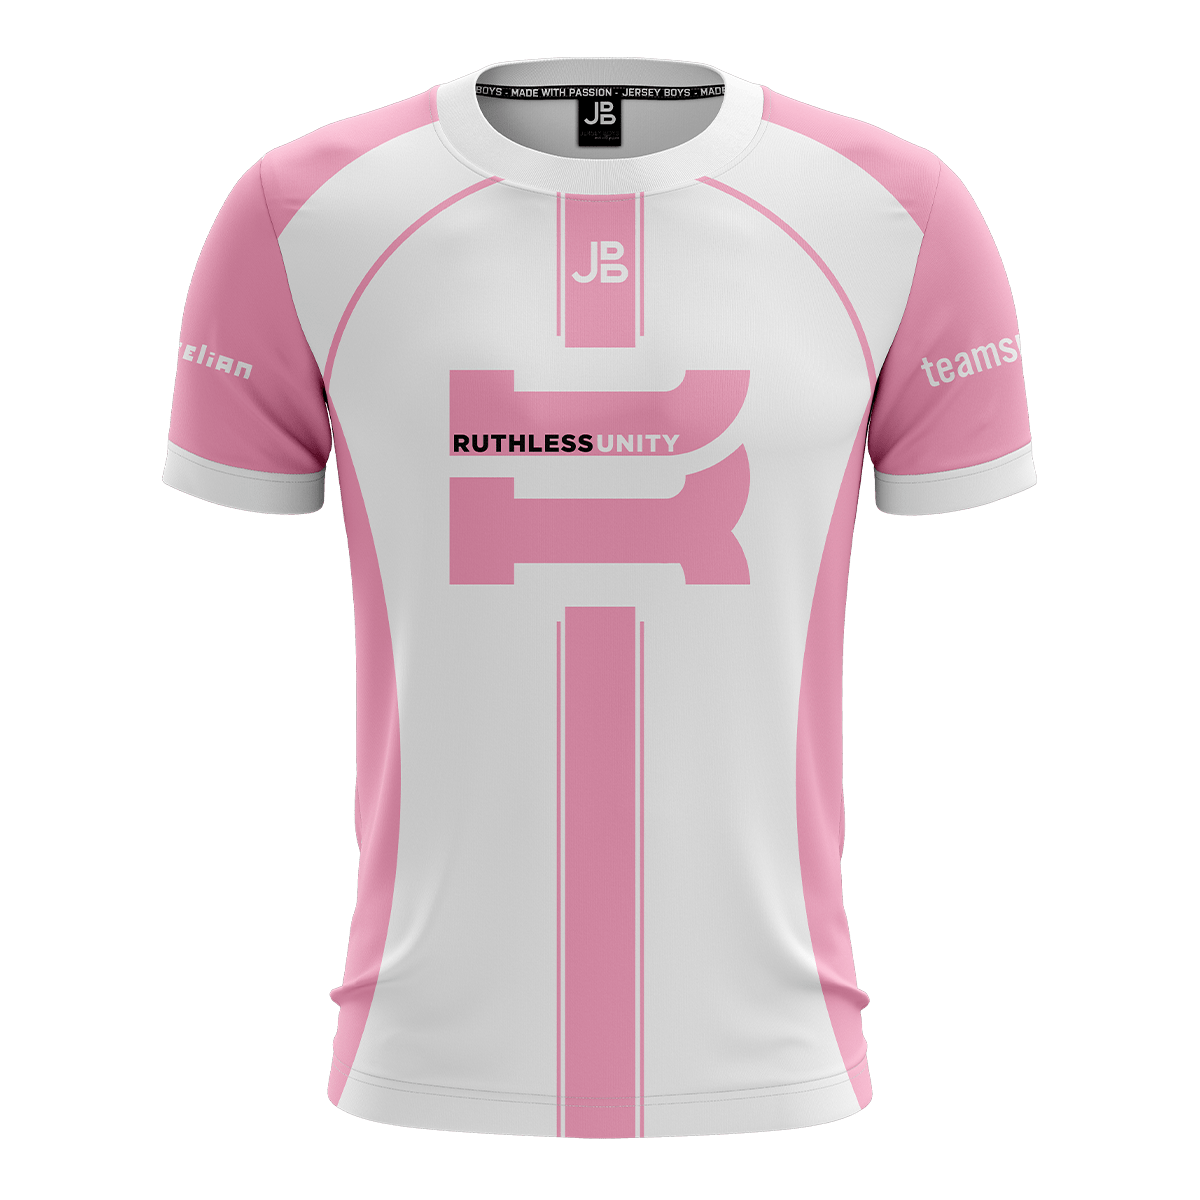 RUTHLESS UNITY LADIES - Jersey 2020